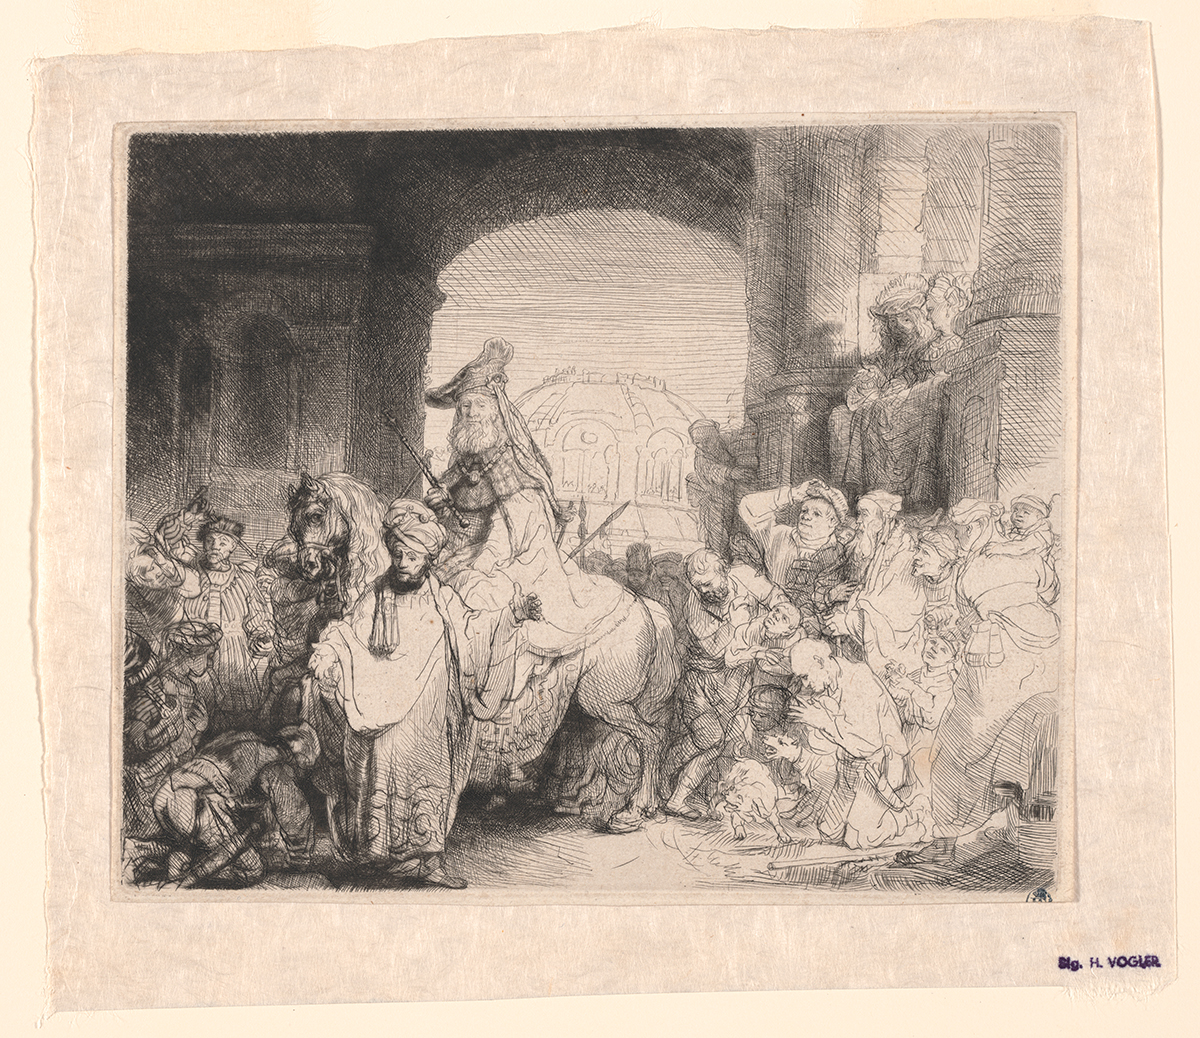 Rembrandt van Rijn, The Triumph of Mordecai, etching and engraving on paper, c. 1641